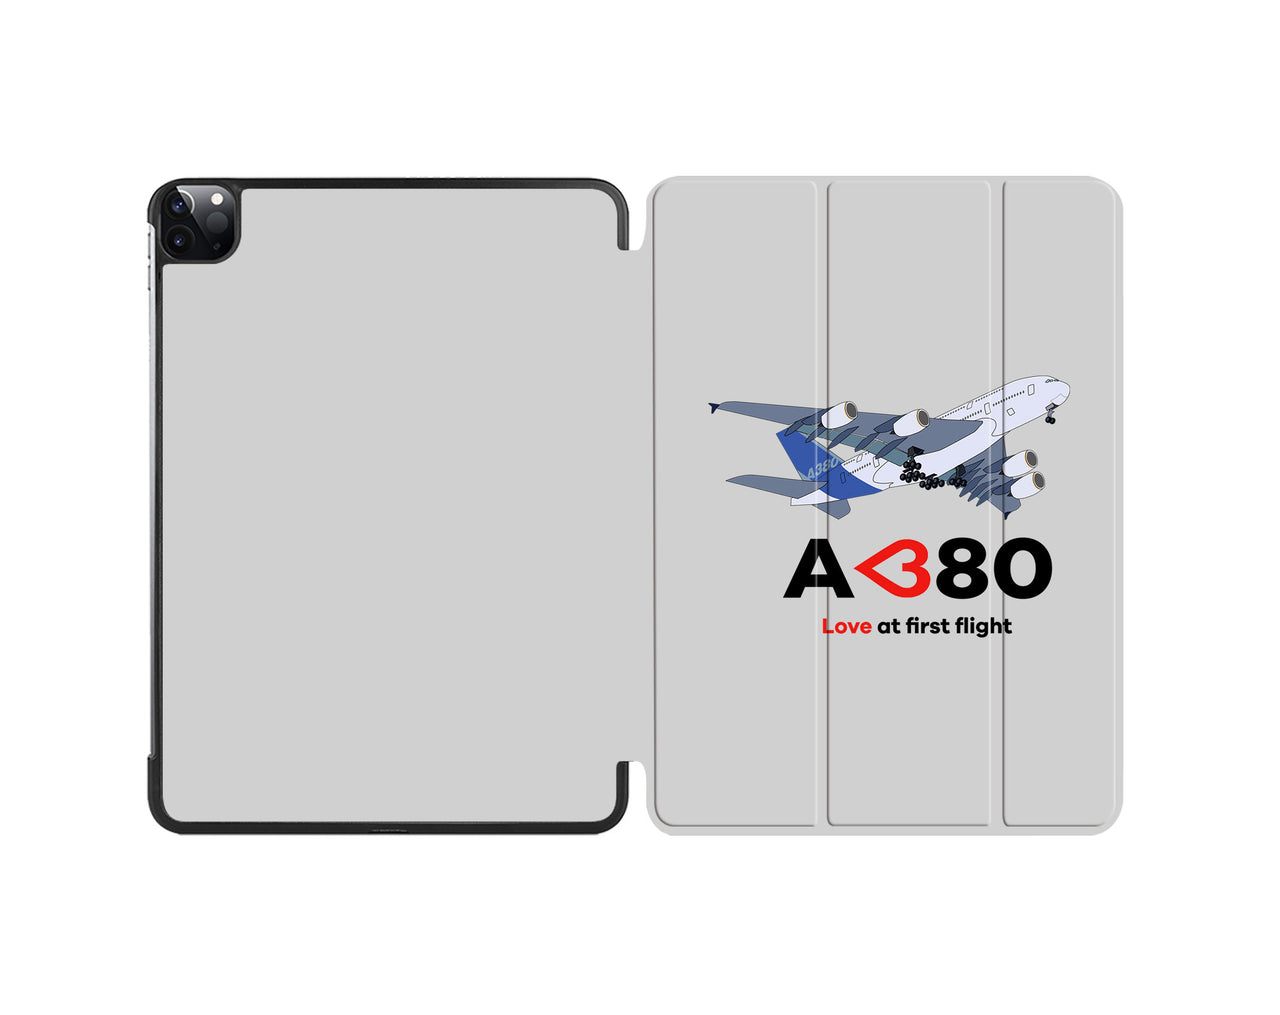 Airbus A380 Love at first flight Designed iPad Cases